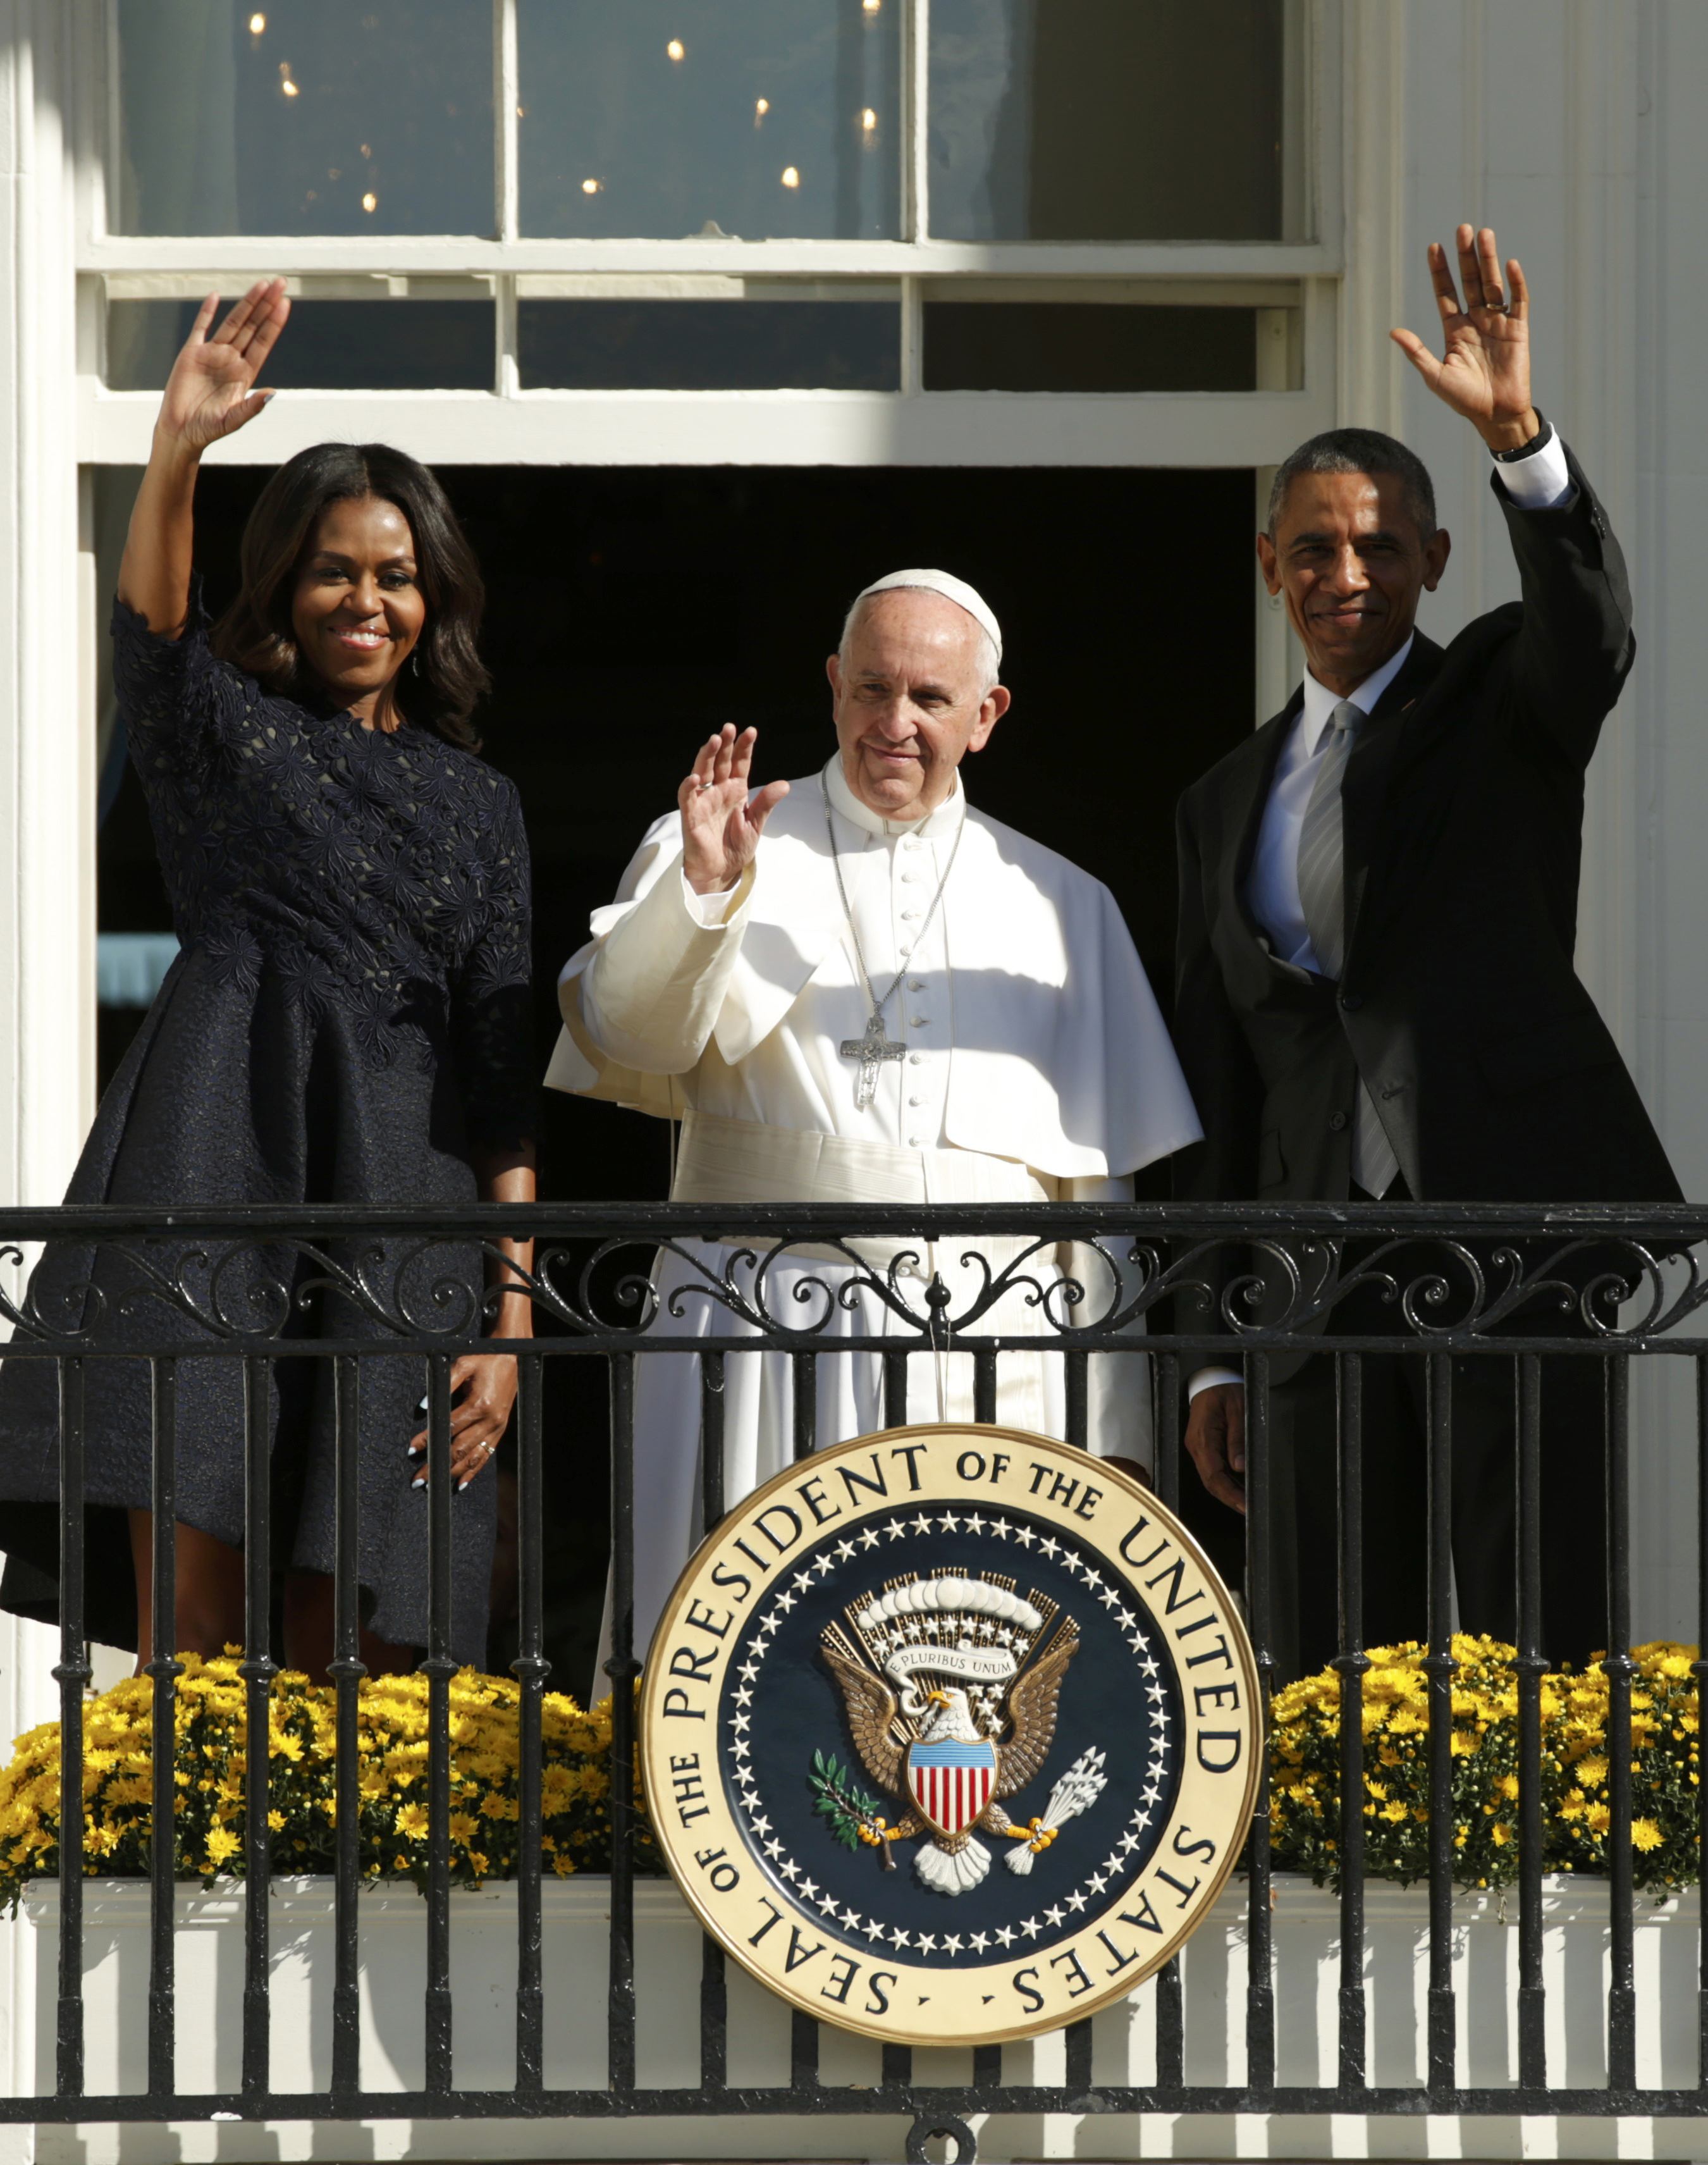 U.S. President Barack Obama (R), first lady Michelle Obama, and Pope Francis wave from a balcony during an official welcoming ceremony held at the White House in Washington September 23, 2015.  REUTERS/Kevin Lamarque (TPX IMAGES OF THE DAY)